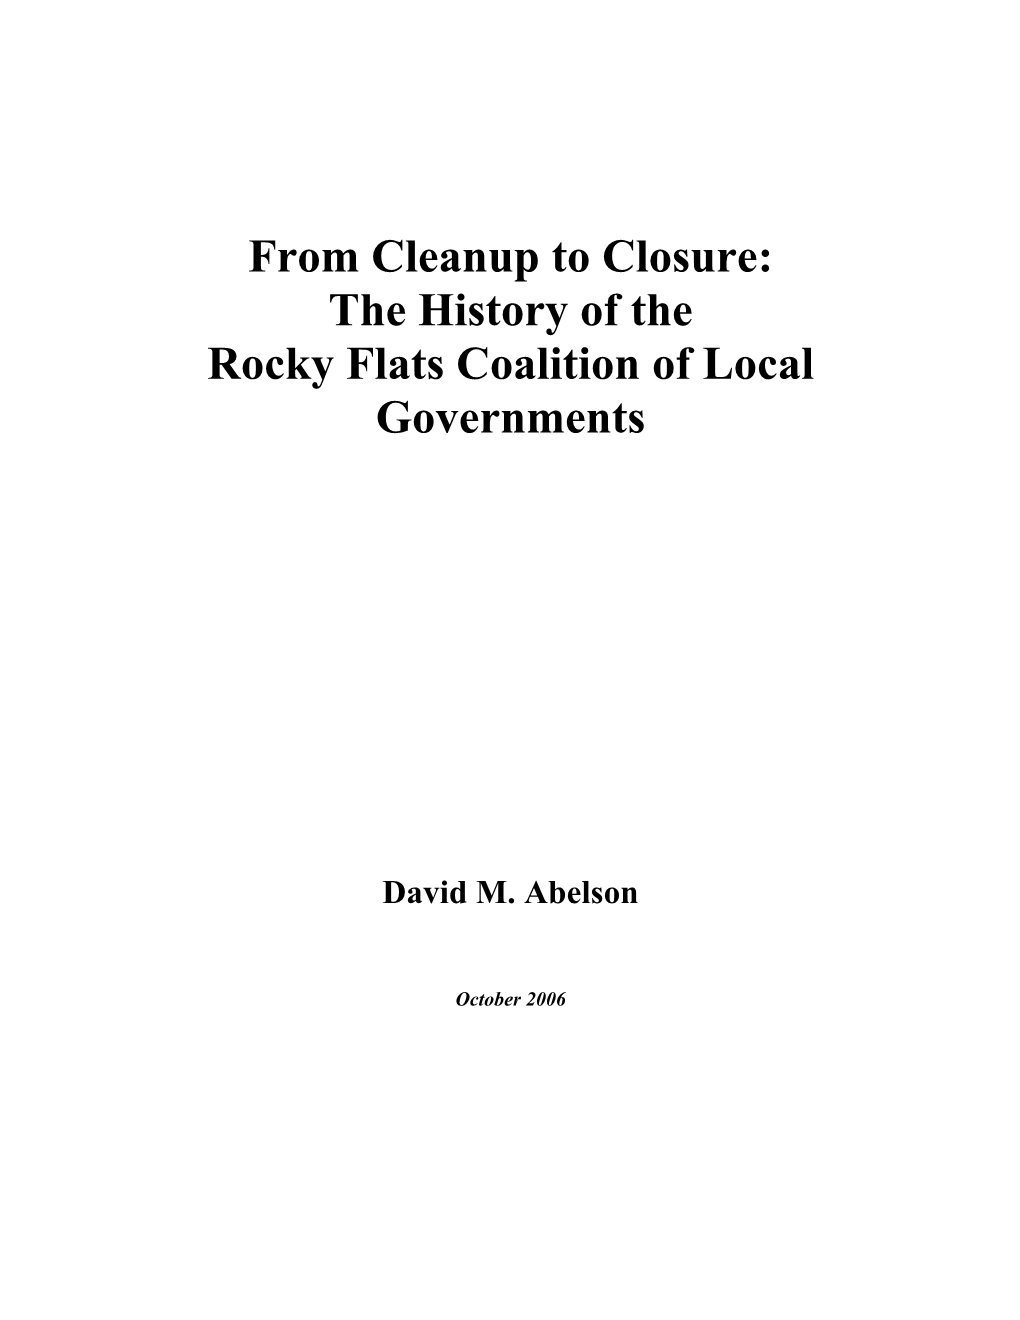 From Cleanup to Closure: the History of the Rocky Flats Coalition of Local Governments